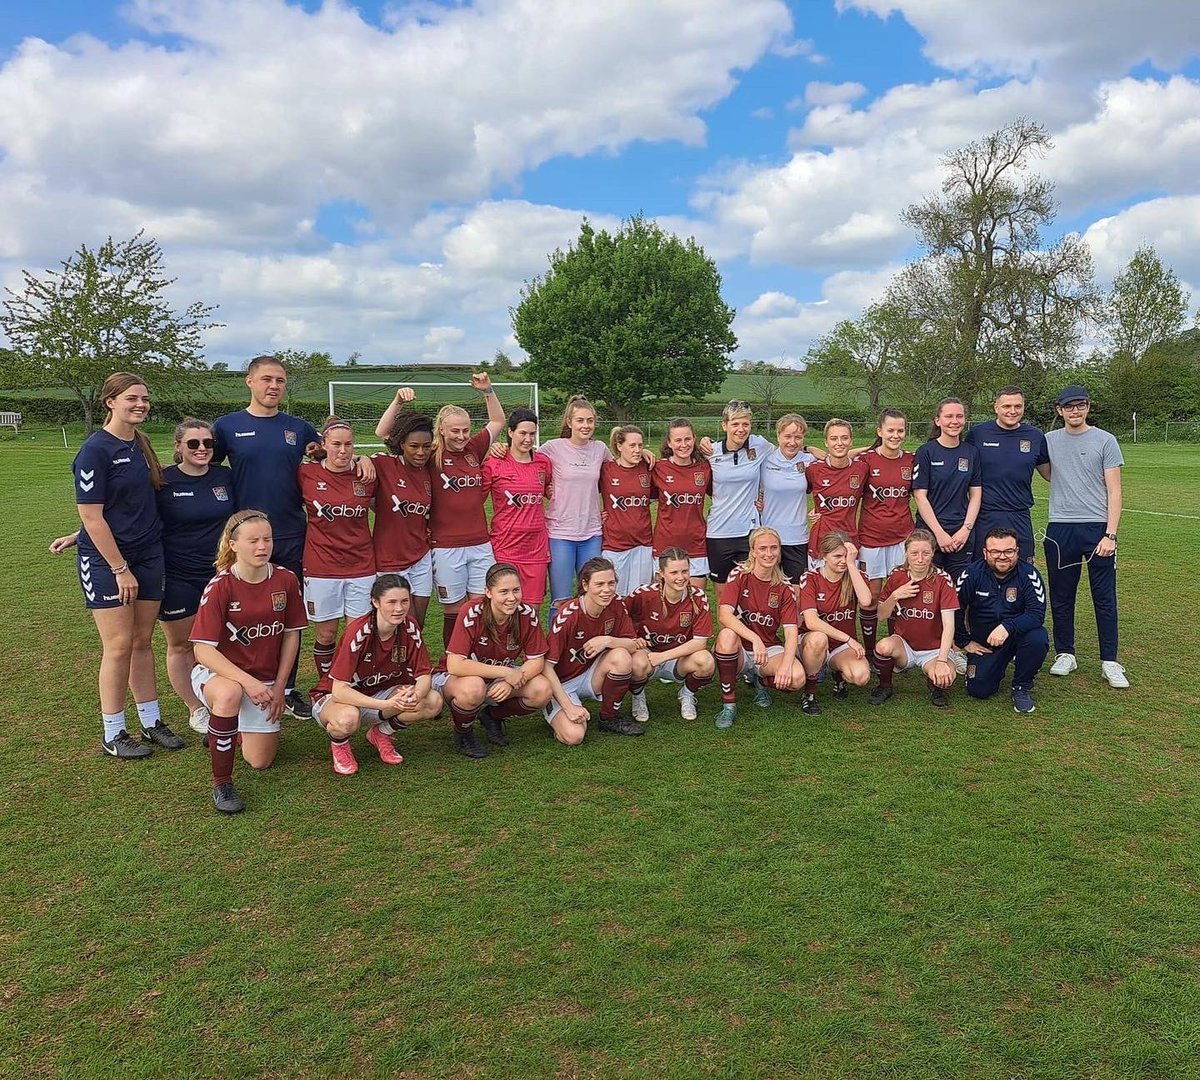 Well done 👏 to @NTFCWomen  @LouBarry_ @JoshOldfield91  & wider team. Brilliant win today & promotion to the @FAWNL 👍. Smashed it & those smiles say it all 👏 
@NorthantsFA_GTP @NorthantsFA @EnglandFootball